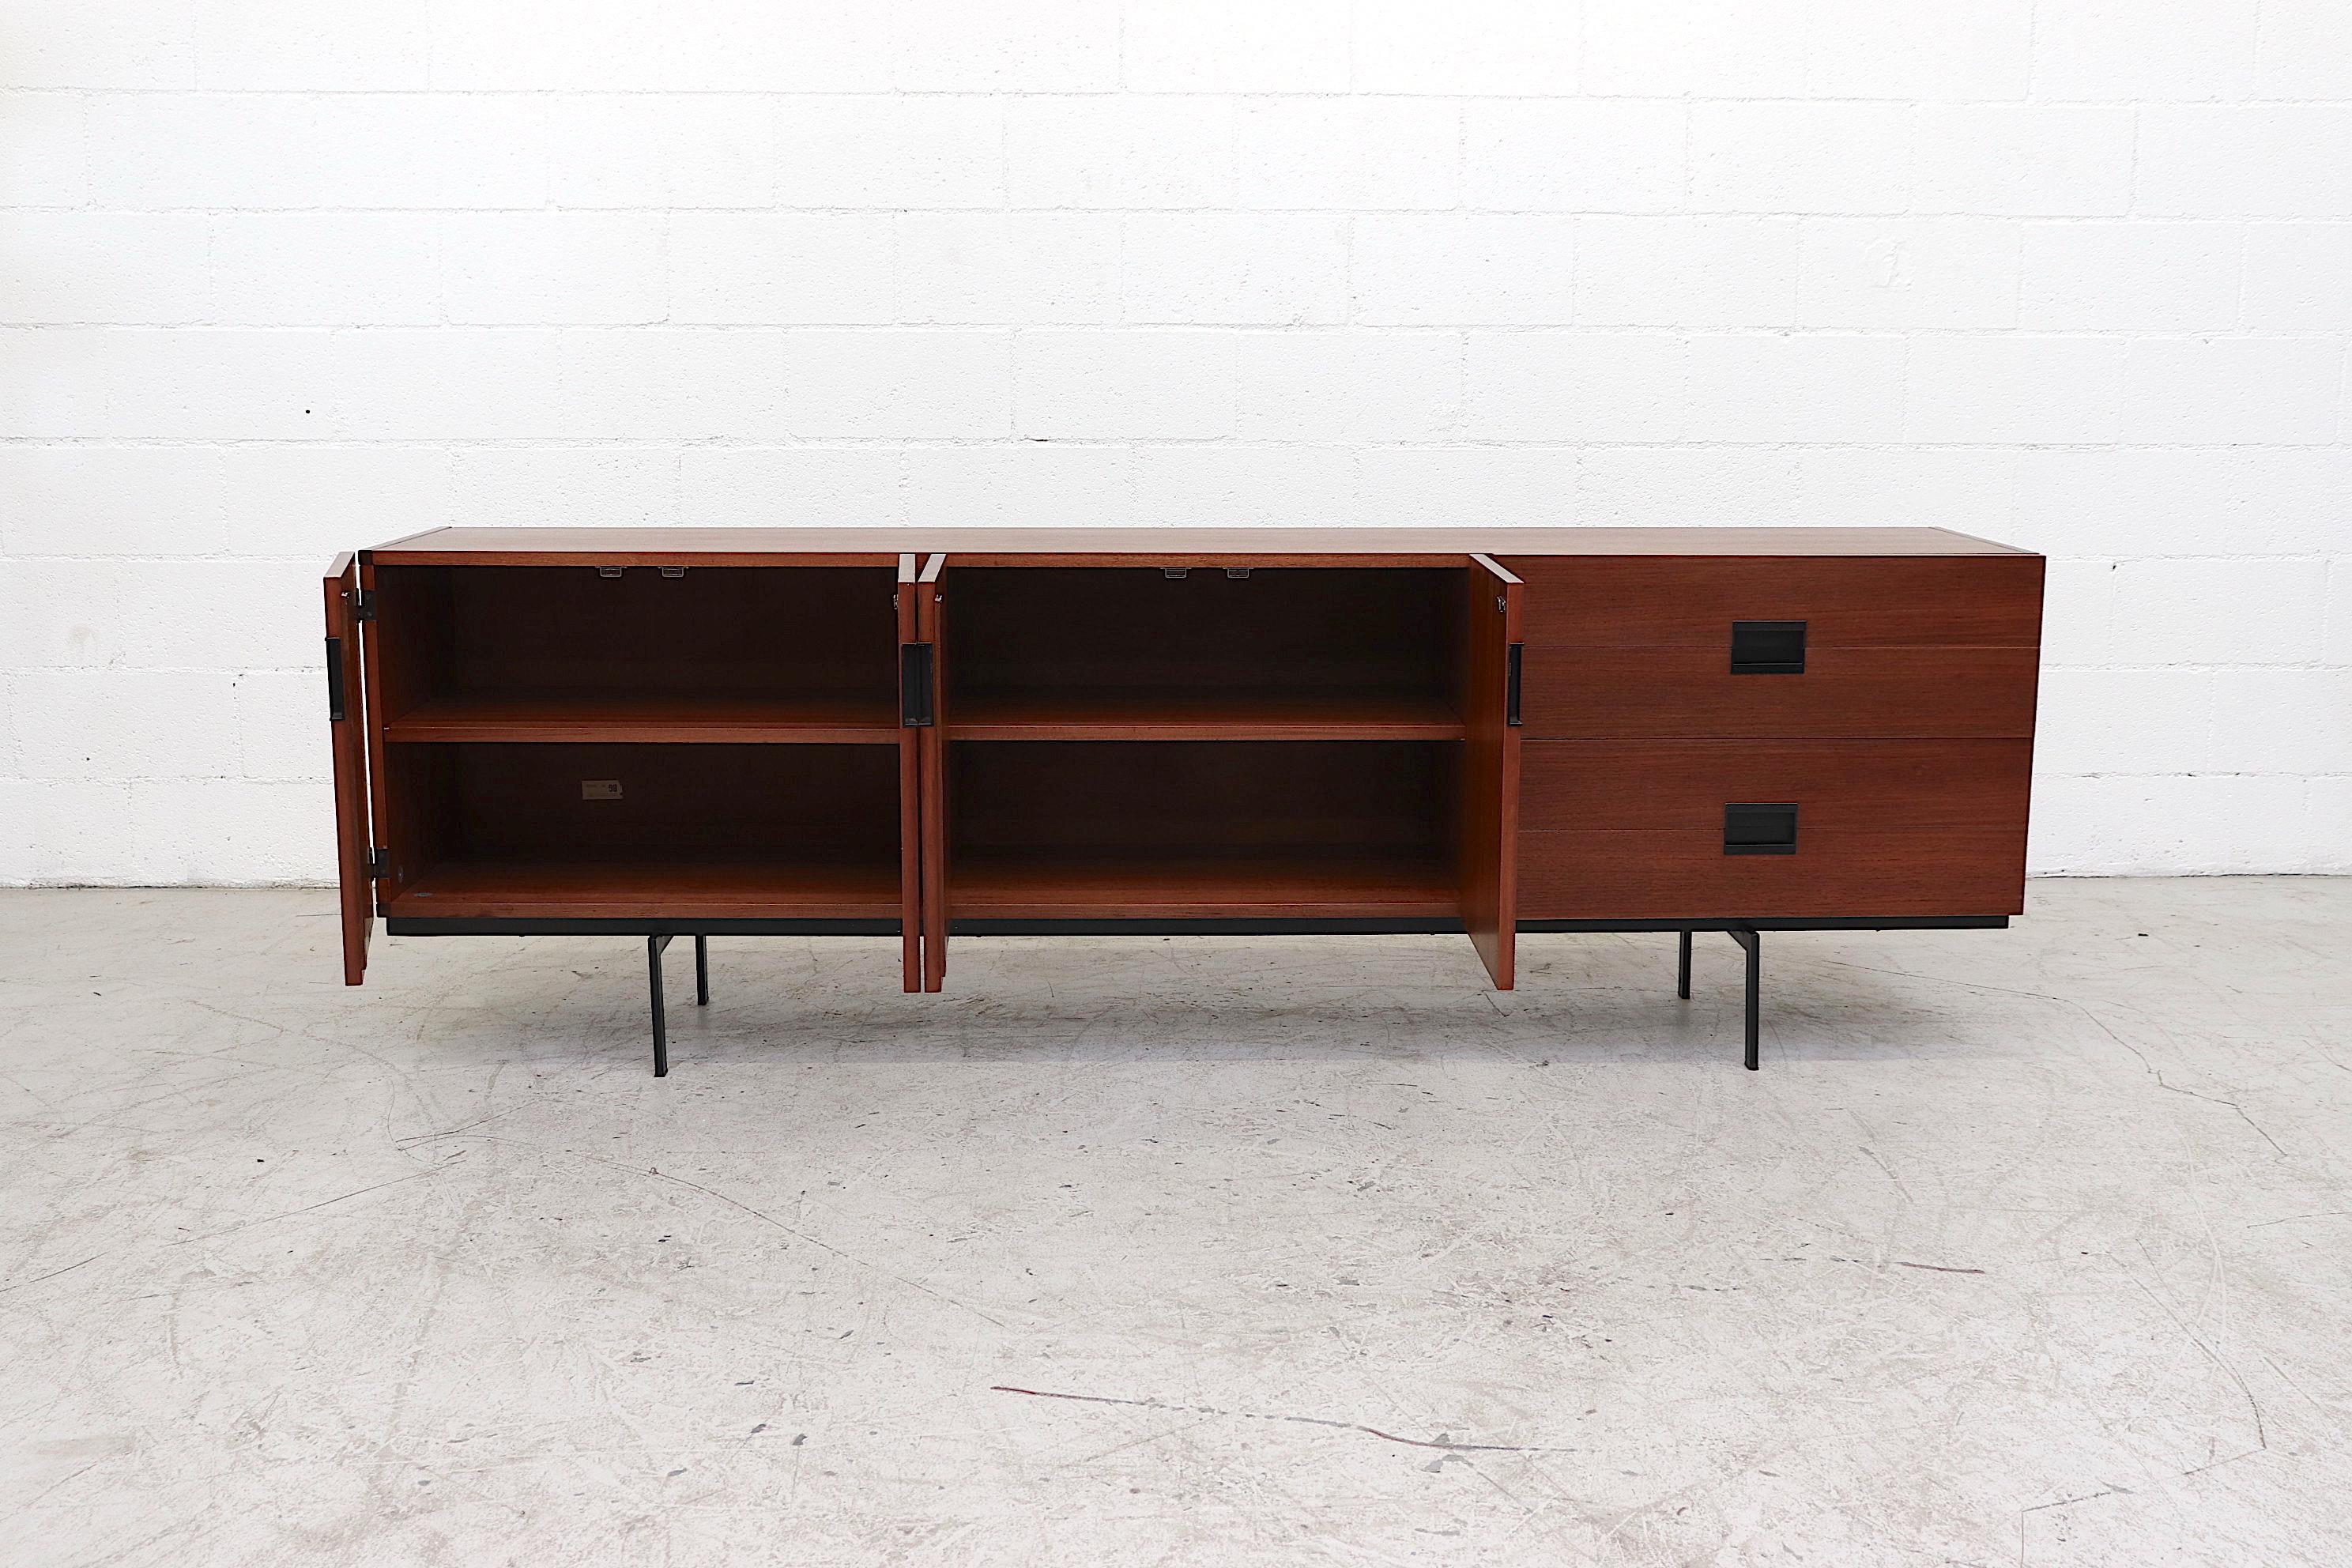 Rare Cees Braakman Japanese series model DU03 teak credenza by Cees Braakman for UMS Pastoe with square inset acrylic handles, signature curve birch drawer interiors and black enameled metal base. In good original condition with wear consistent with